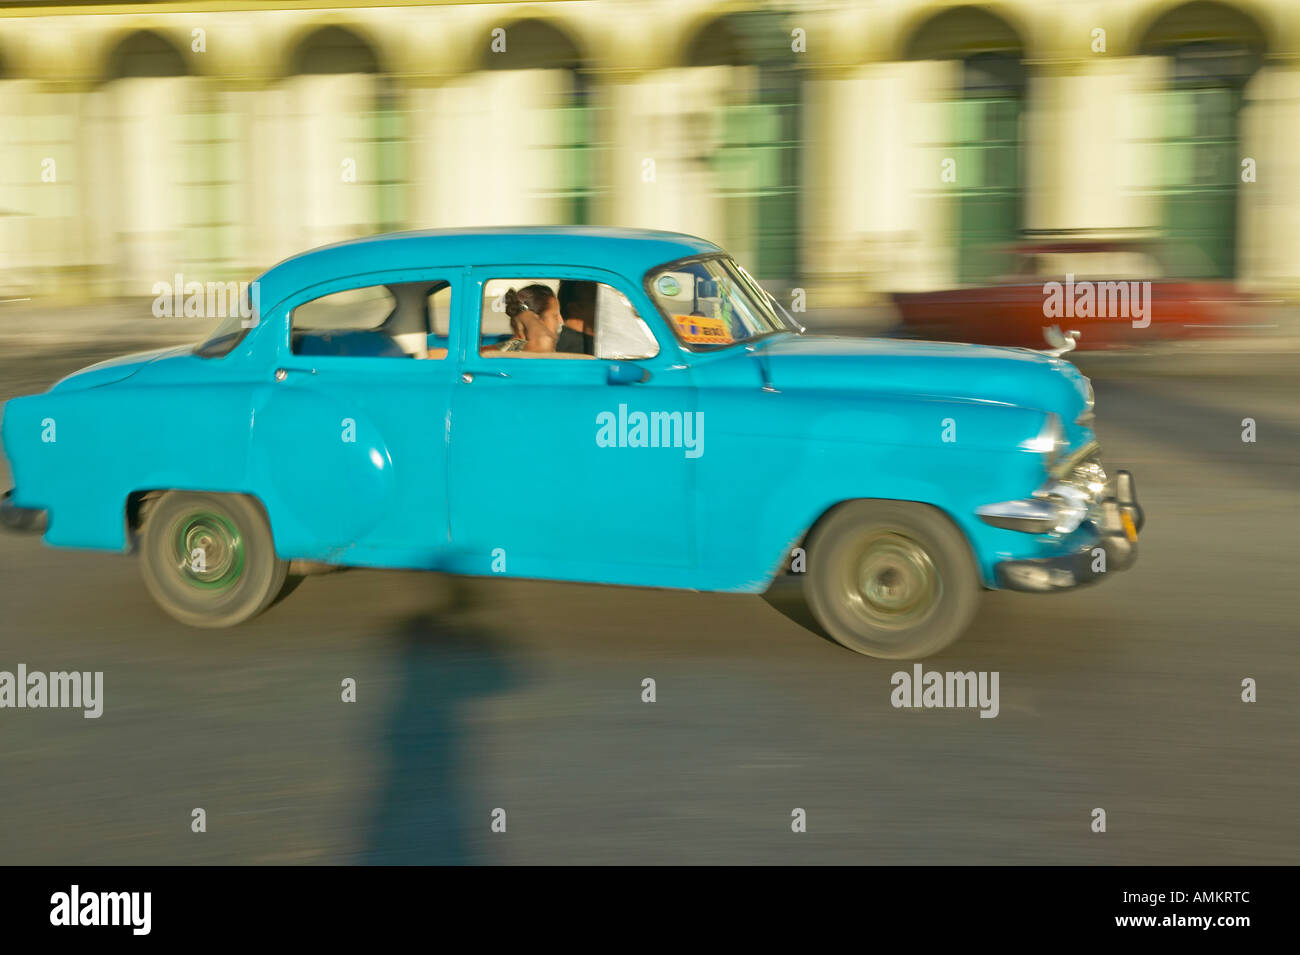 A turquoise car driving the streets of Old Havana Cuba Stock Photo